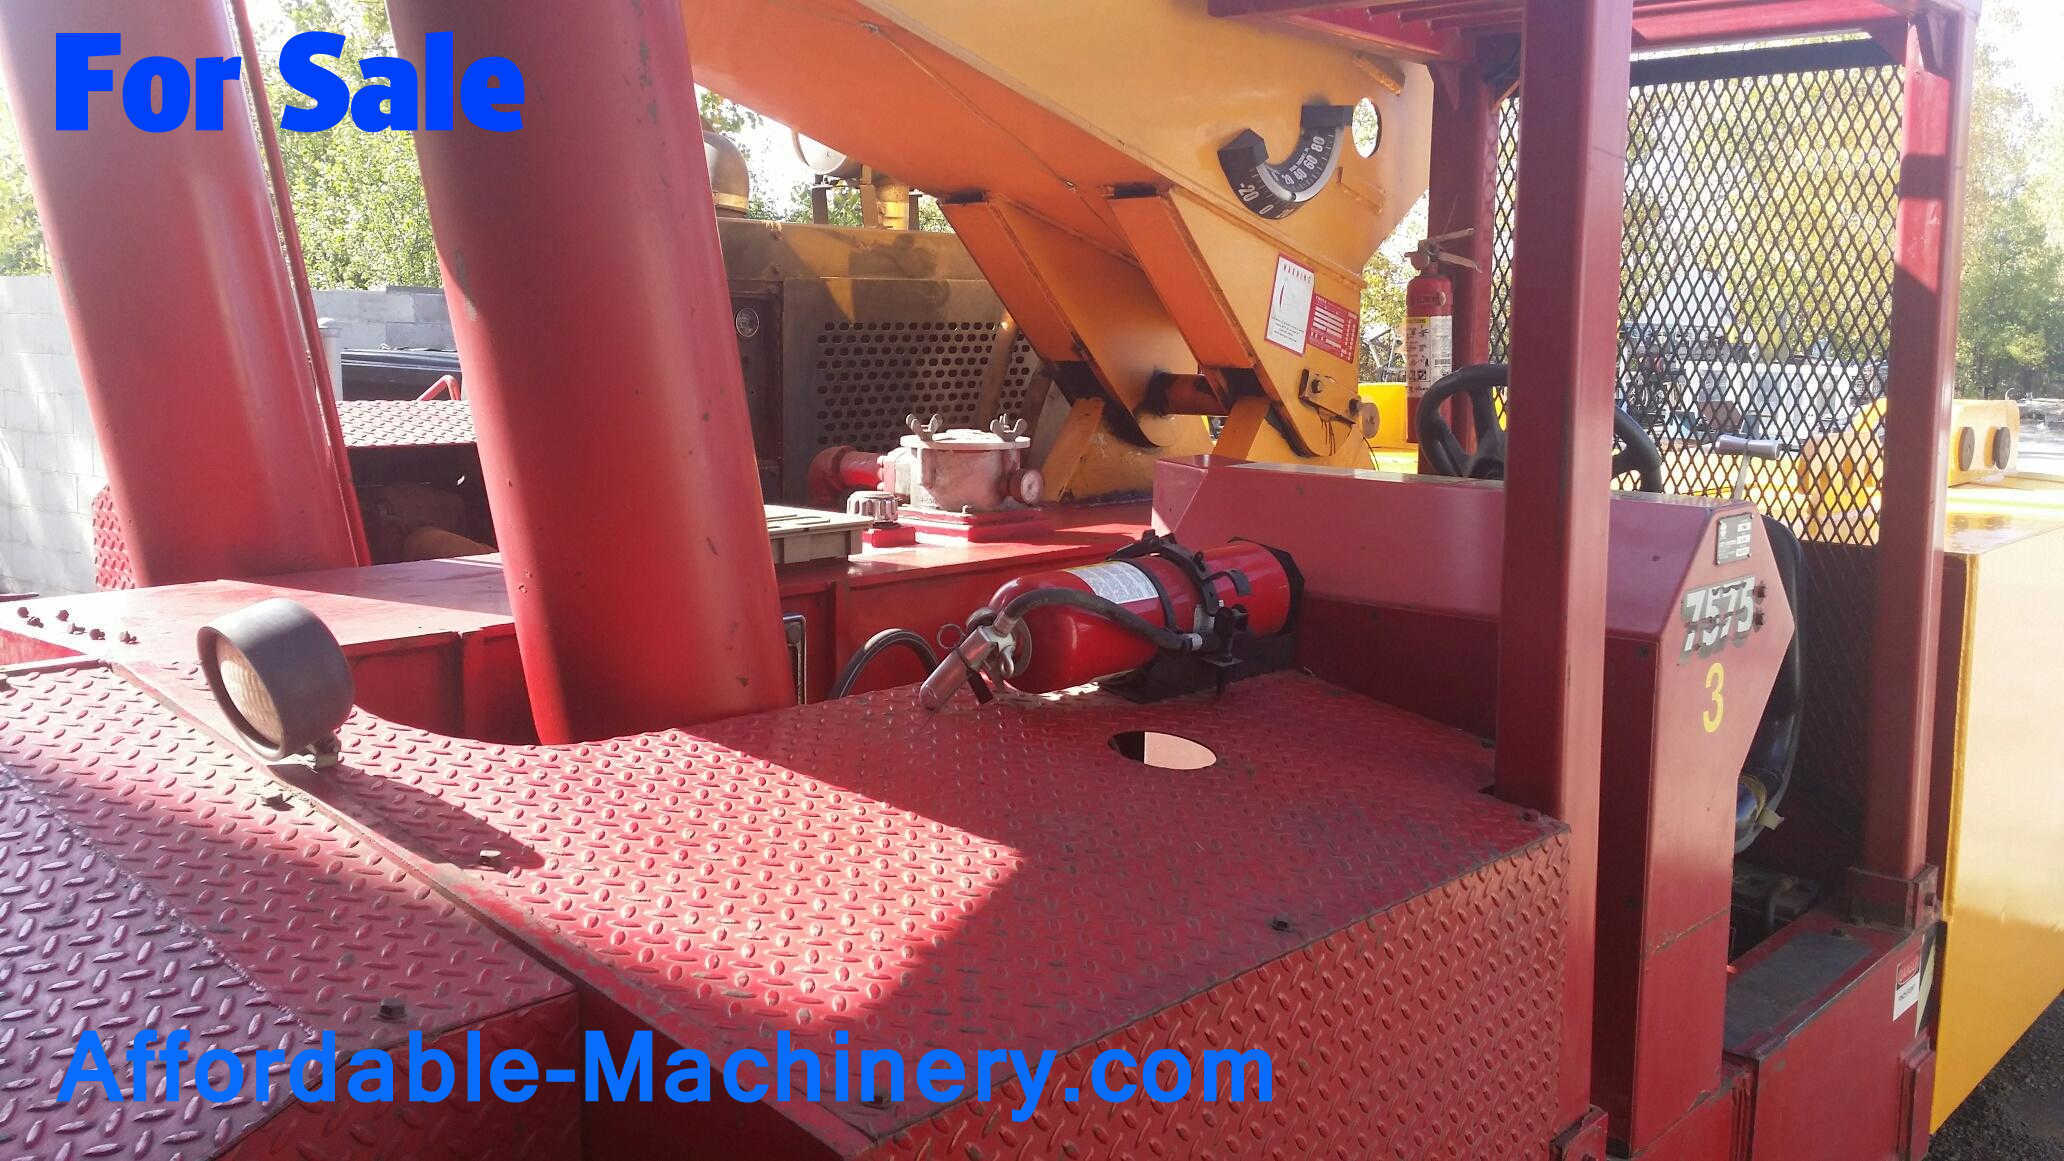 75 Ton Used Mobilift (Mobile Lift) For Sale